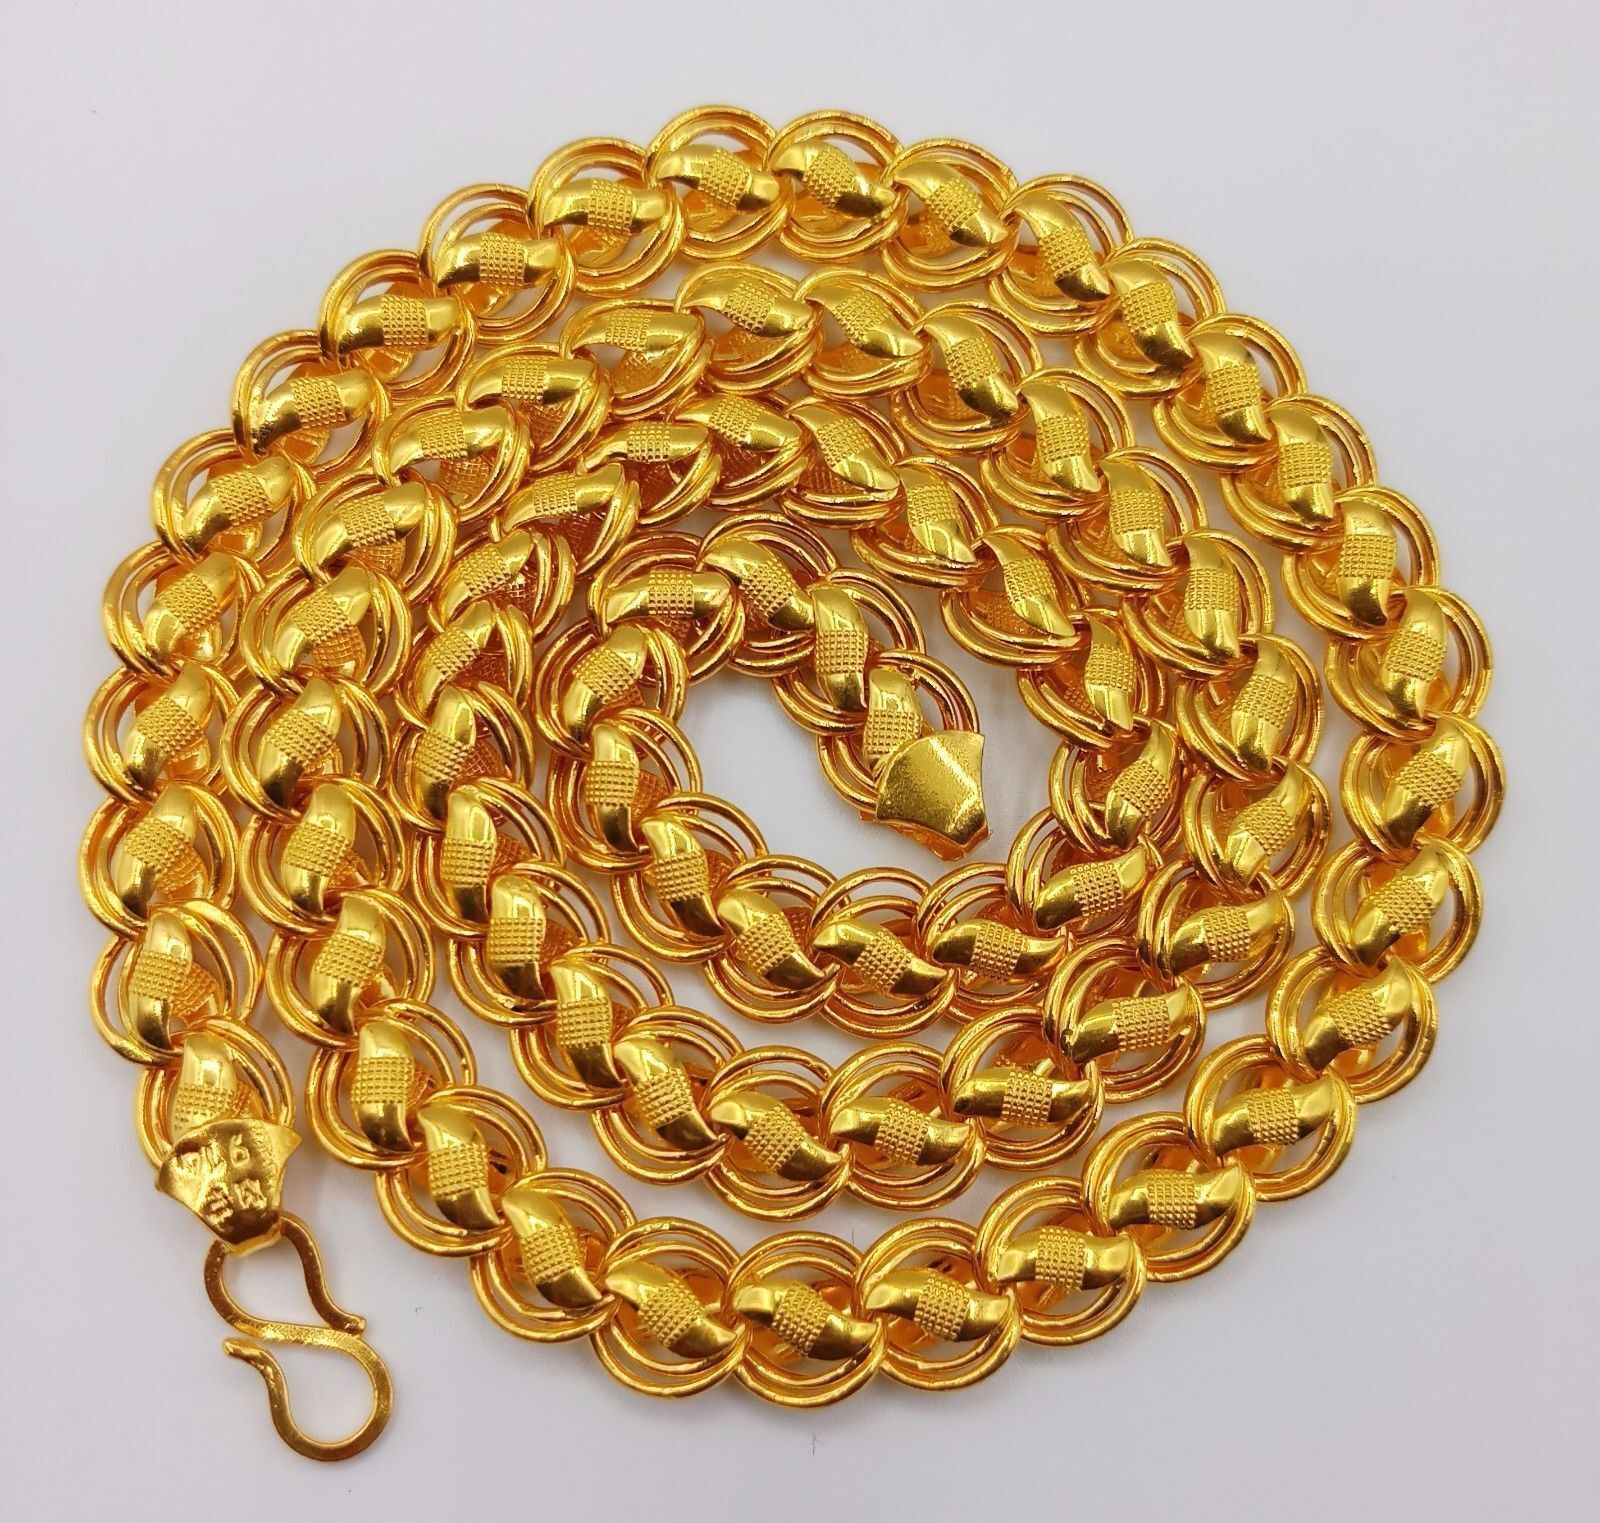 Primary image for 20" LONG MEN WOMEN UNISEX LOTUS DESIGN 916 22 K YELLOW GOLD LINK CHAIN NECKLACE 